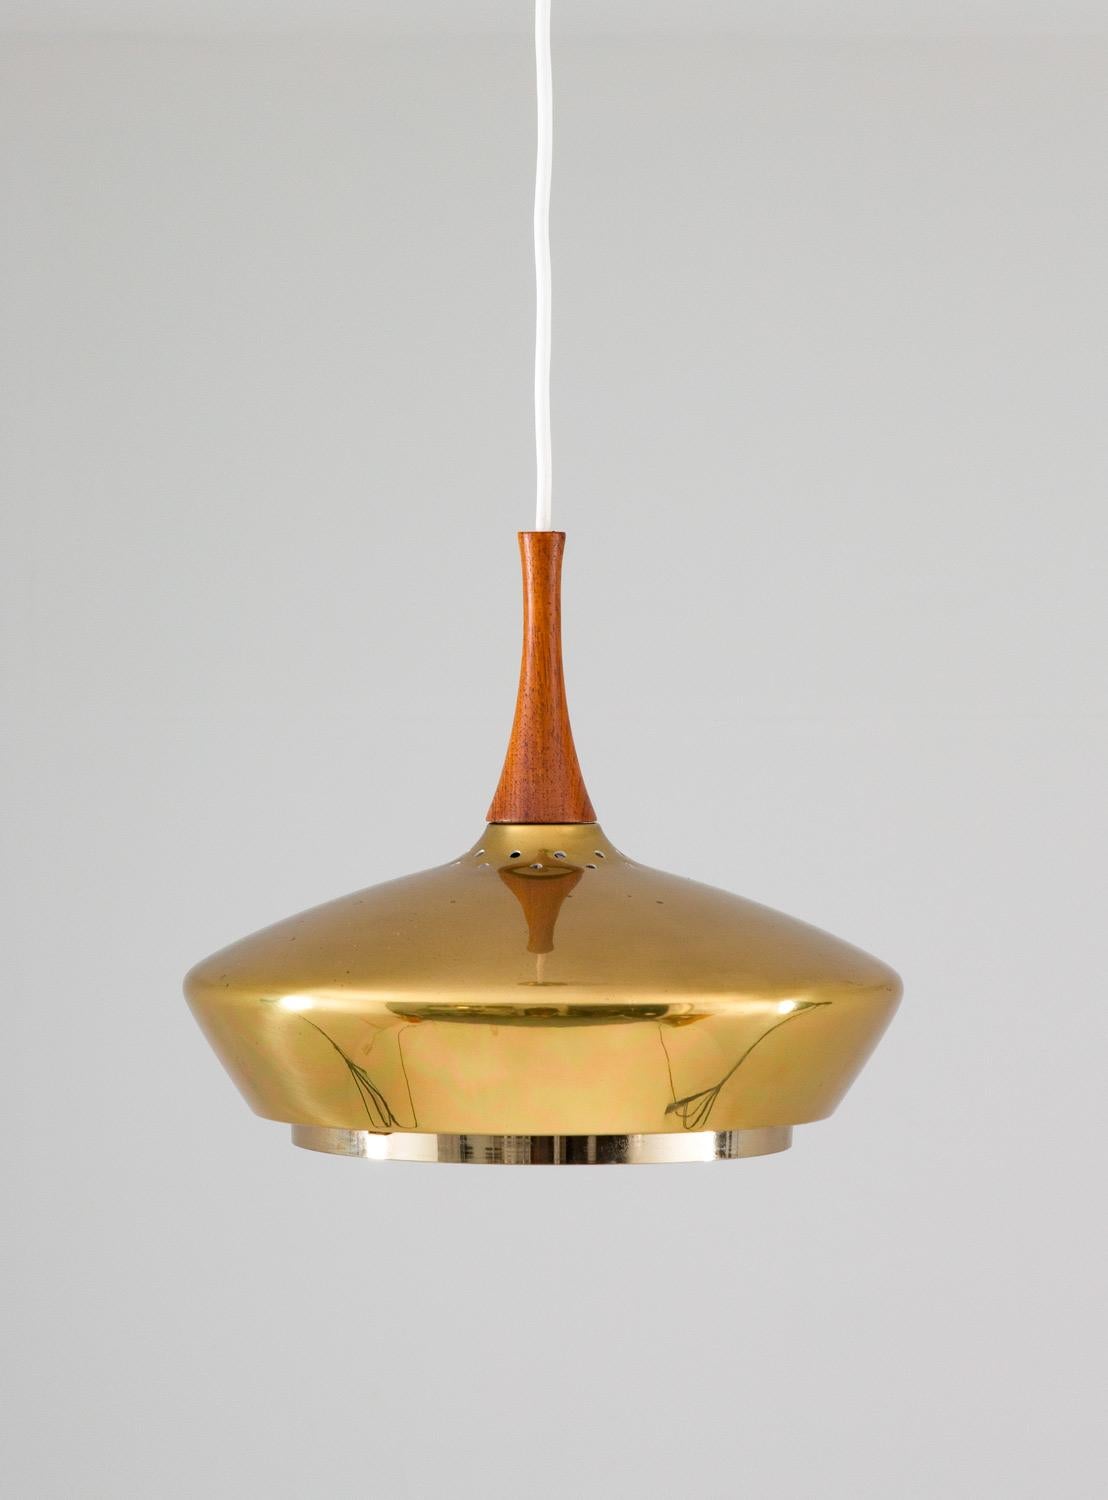 Rare ceiling lamp in brass and wood manufactured by Fagerhult, Sweden.
The lamp is made of thick brass and comes with its original brass canopy. The beautiful shape reminds a lot of model 